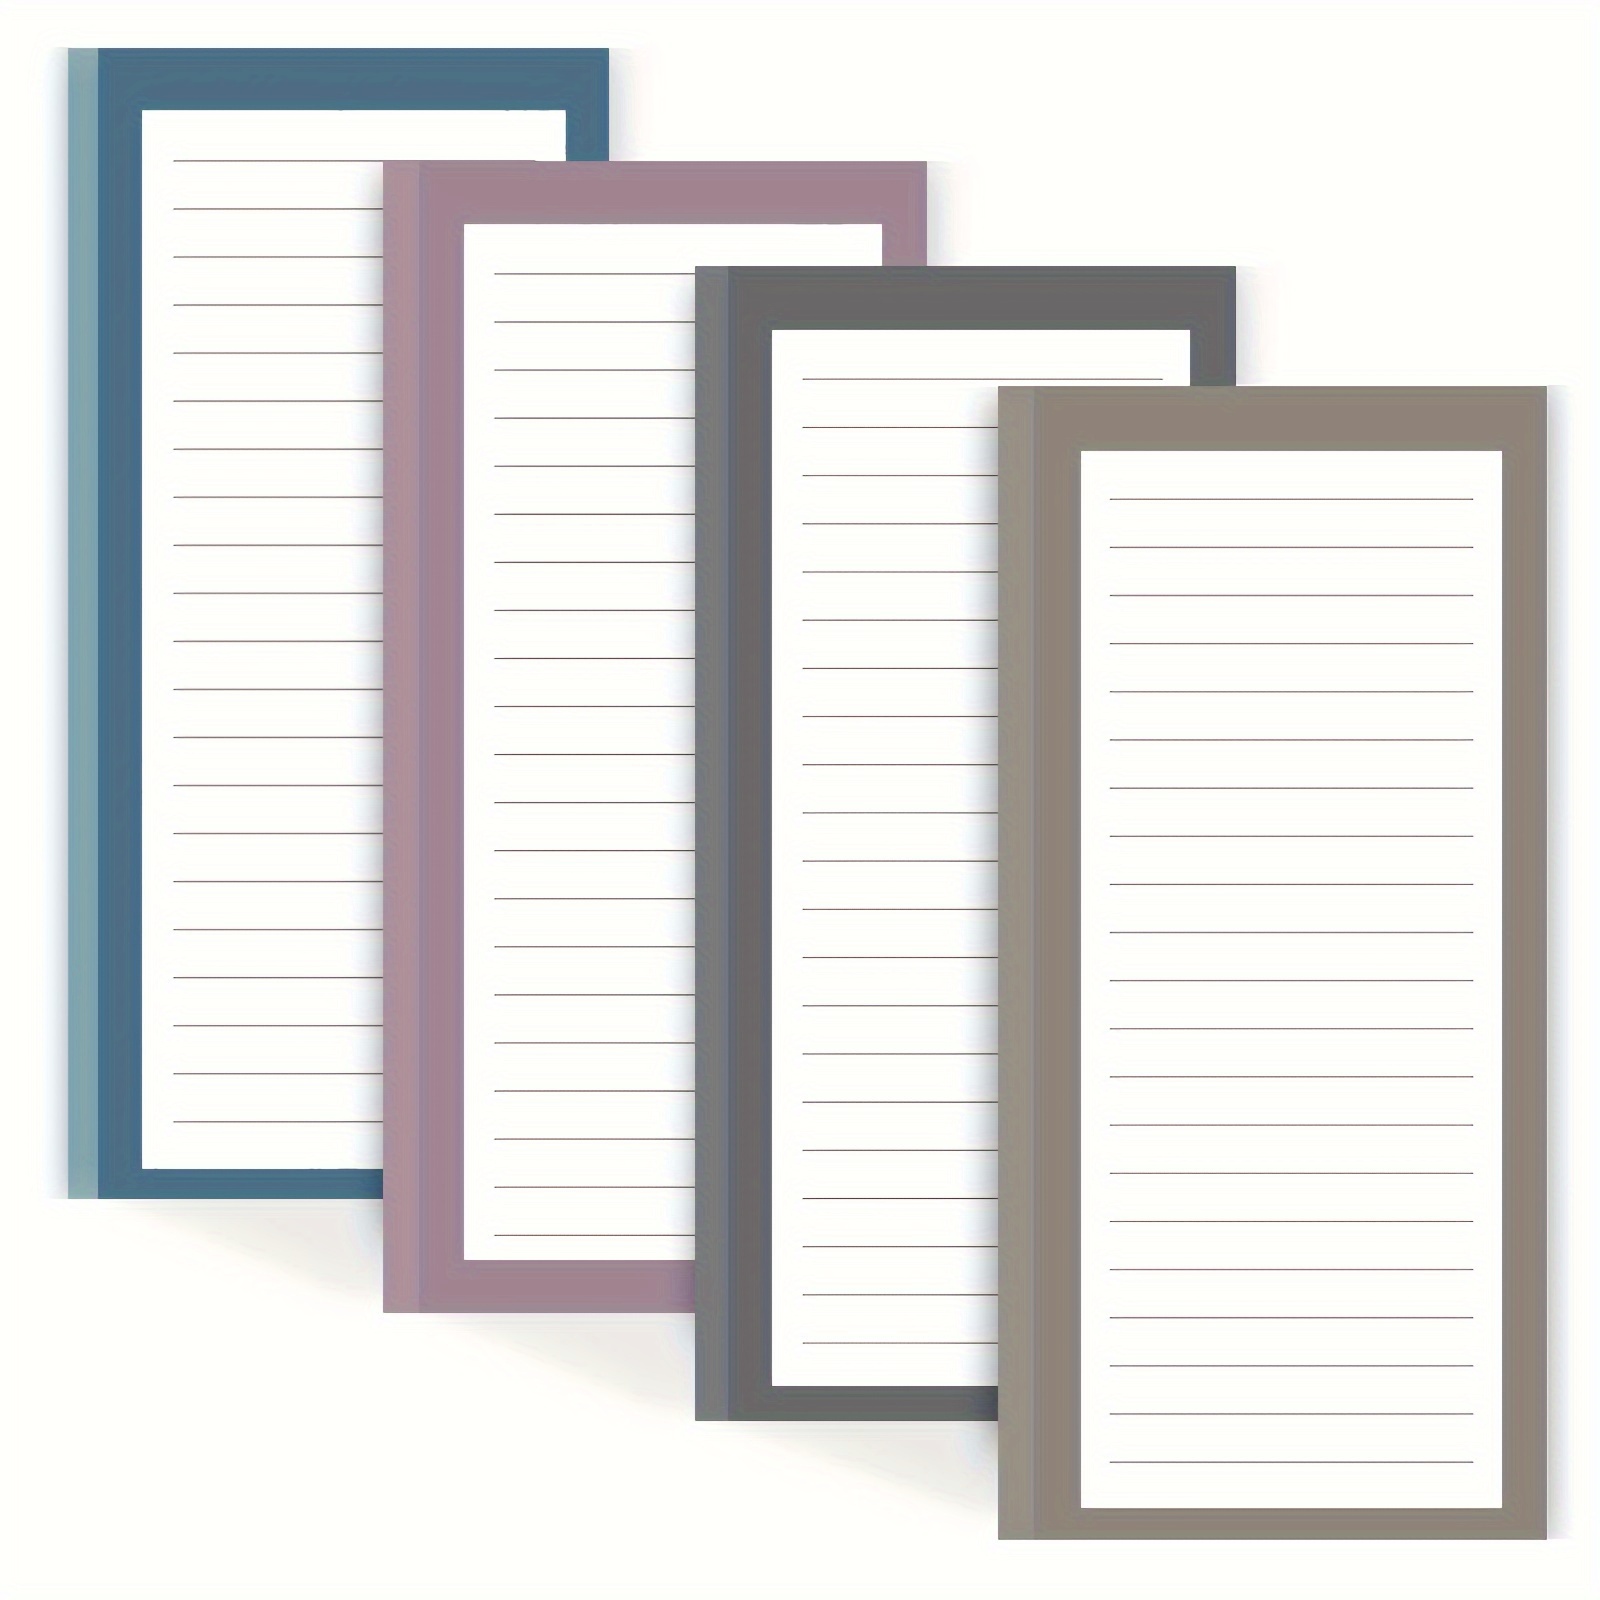 

4pcs Magnetic Notepads For Refrigerator, 50sheets/pad Grocery List Magnet Pad For Fridge, Design Magnetic Grocery List Pad For Fridge, Grocery List Notepad, To-do Memos, List